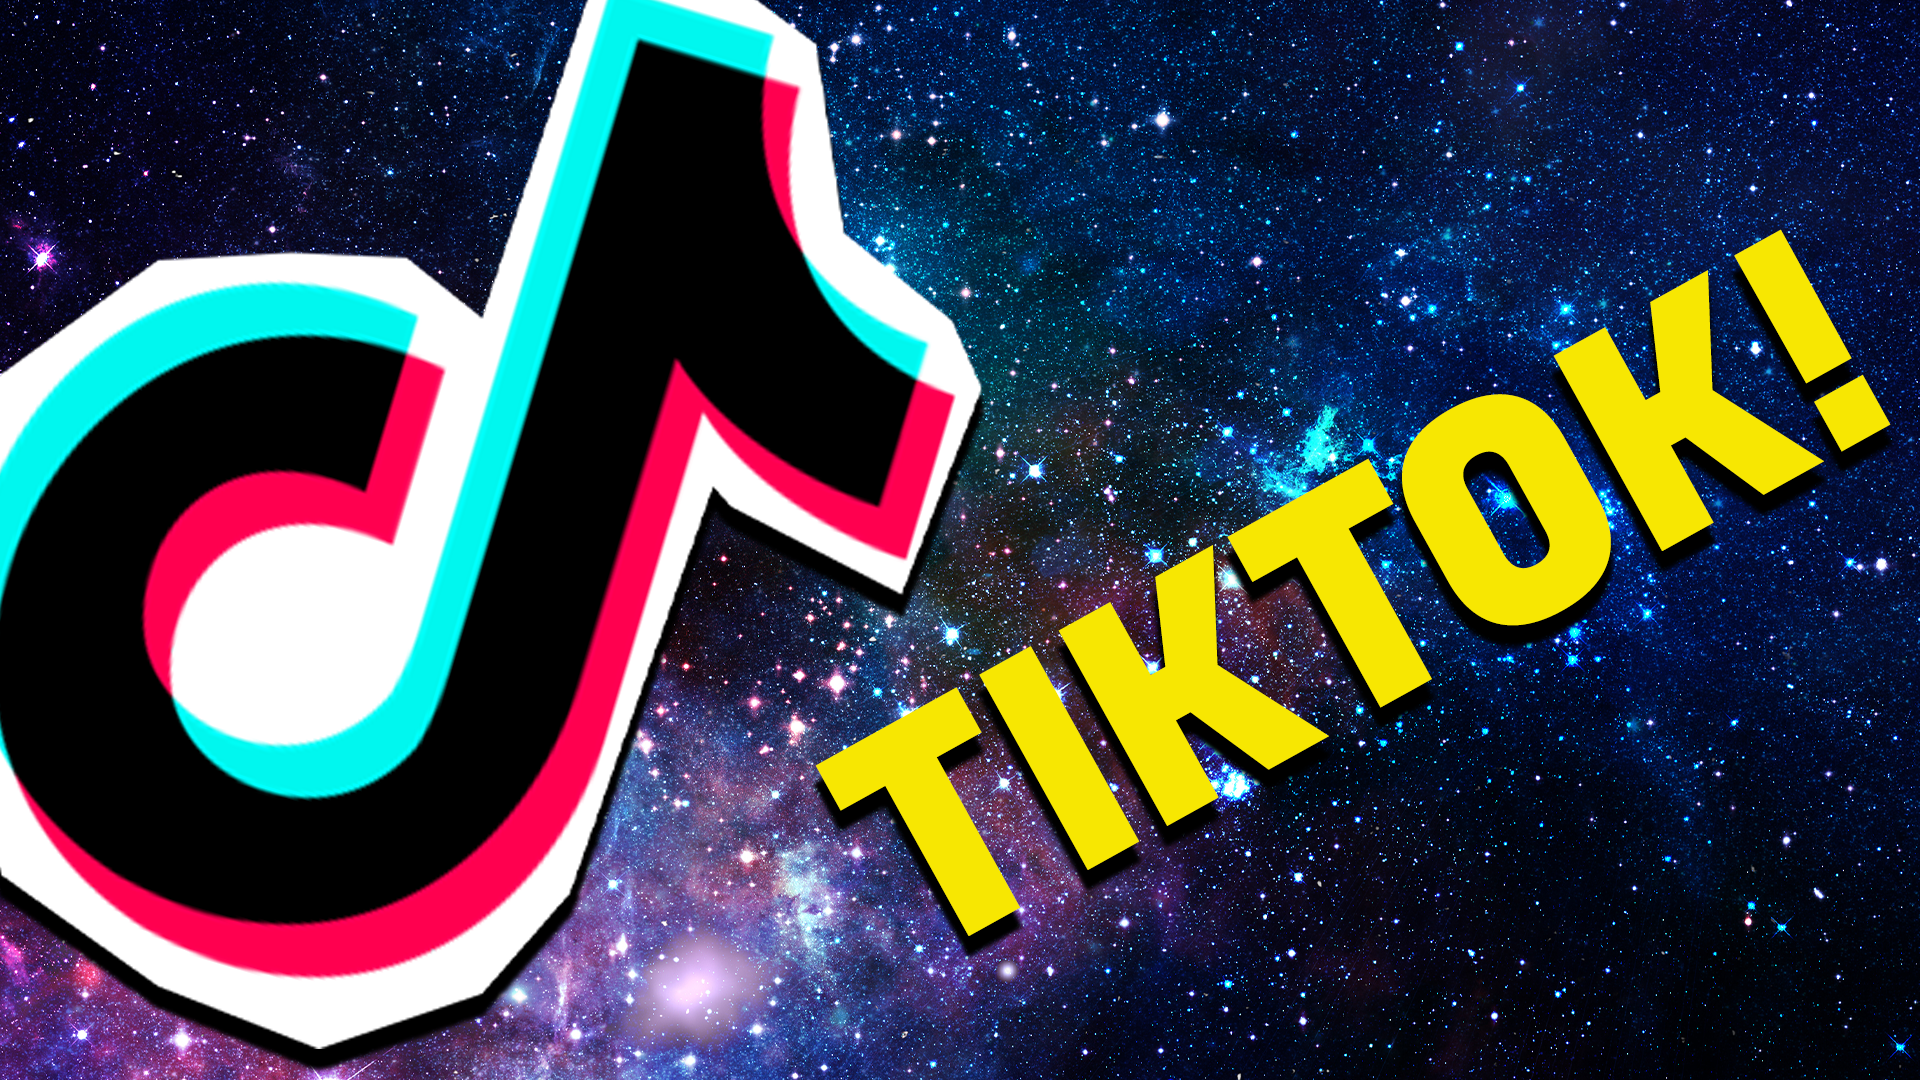 You got TikTok! It's easy to see why this super popular app is right for you! You love music, comedy and everything in between!